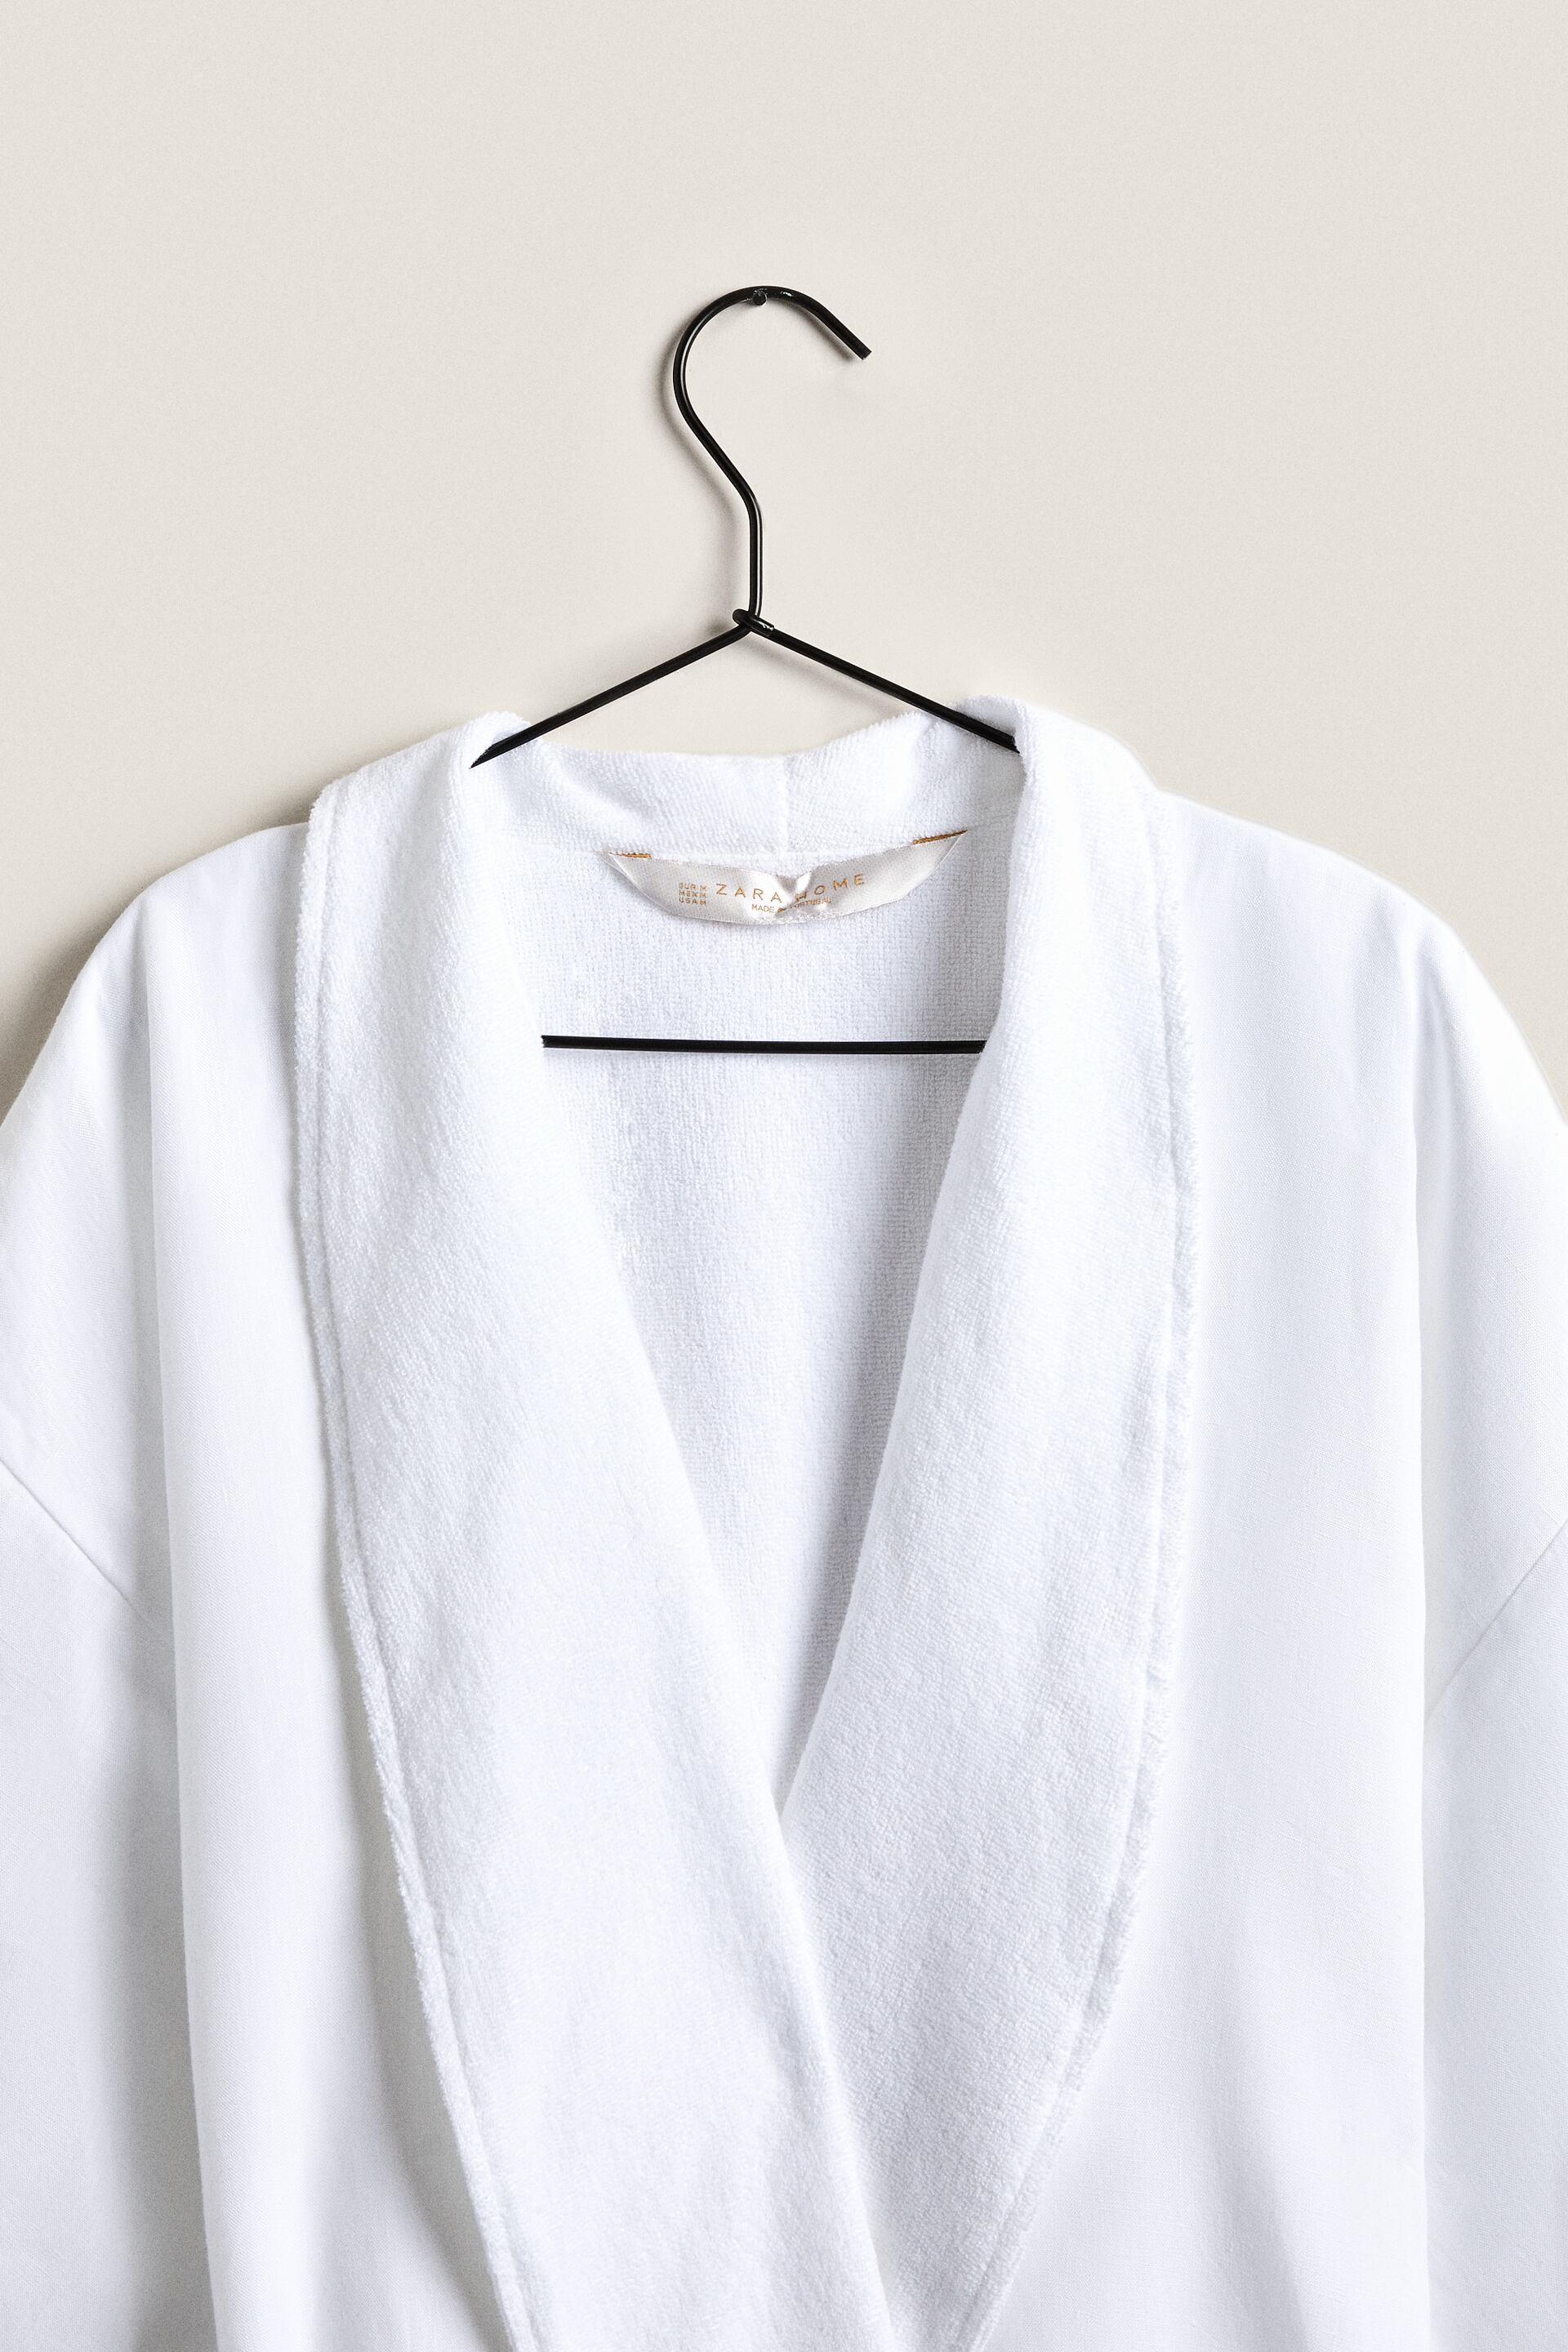 WASHED LINEN TERRY DRESSING GOWN - White | ZARA United States